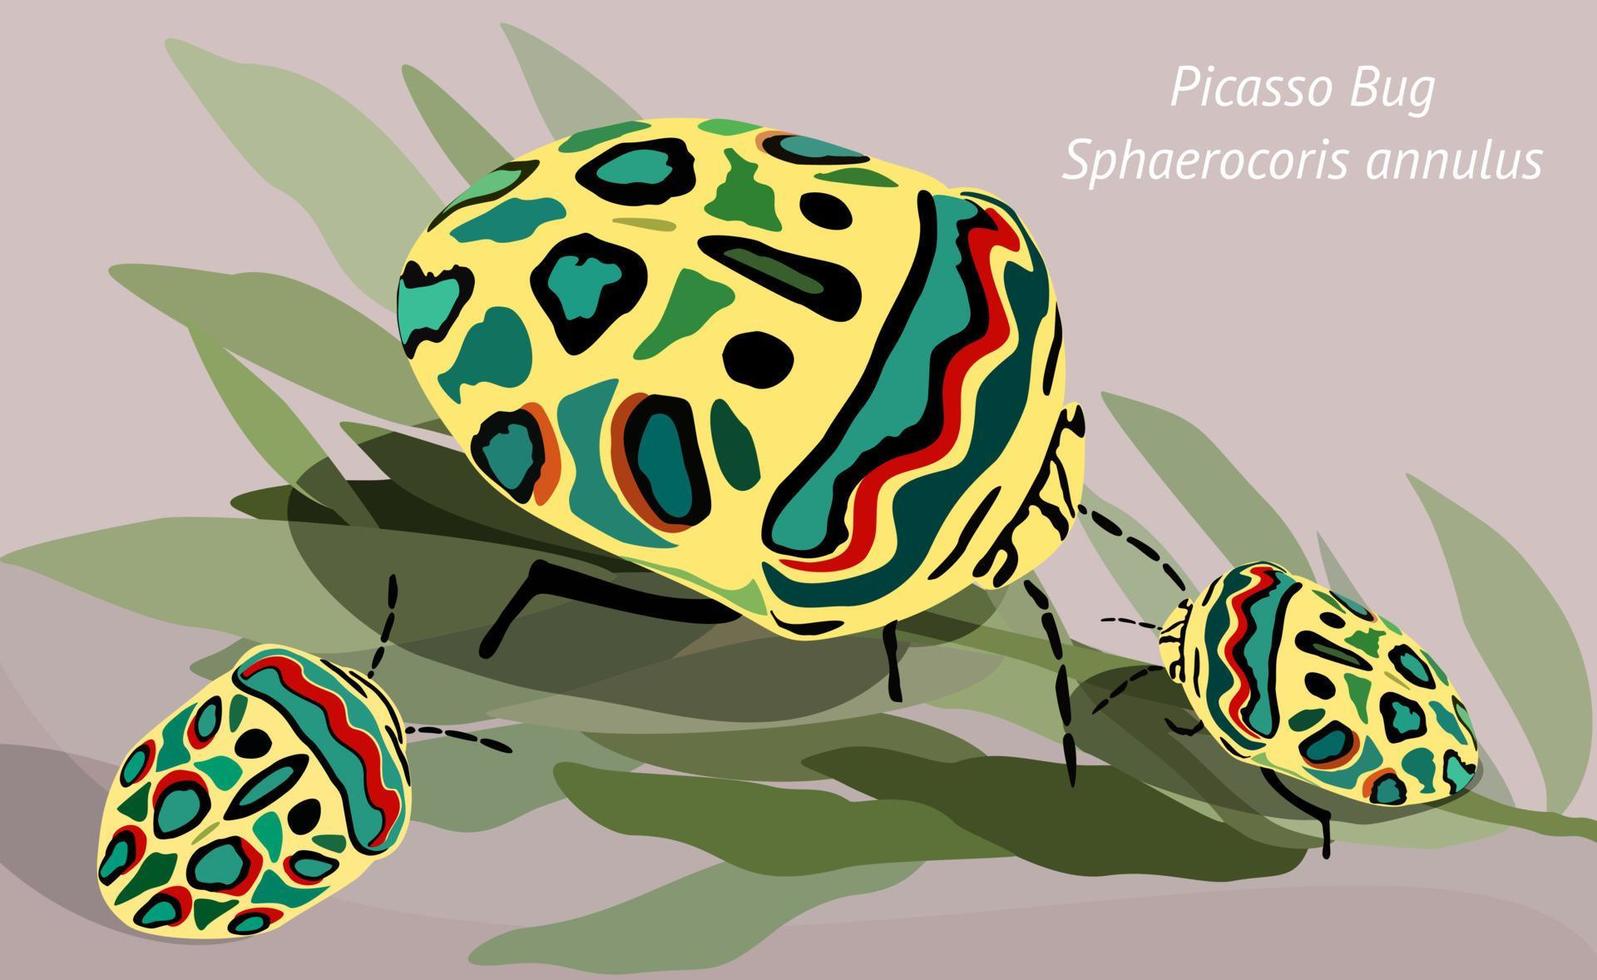 Picasso bugs. Vector illustration on background.